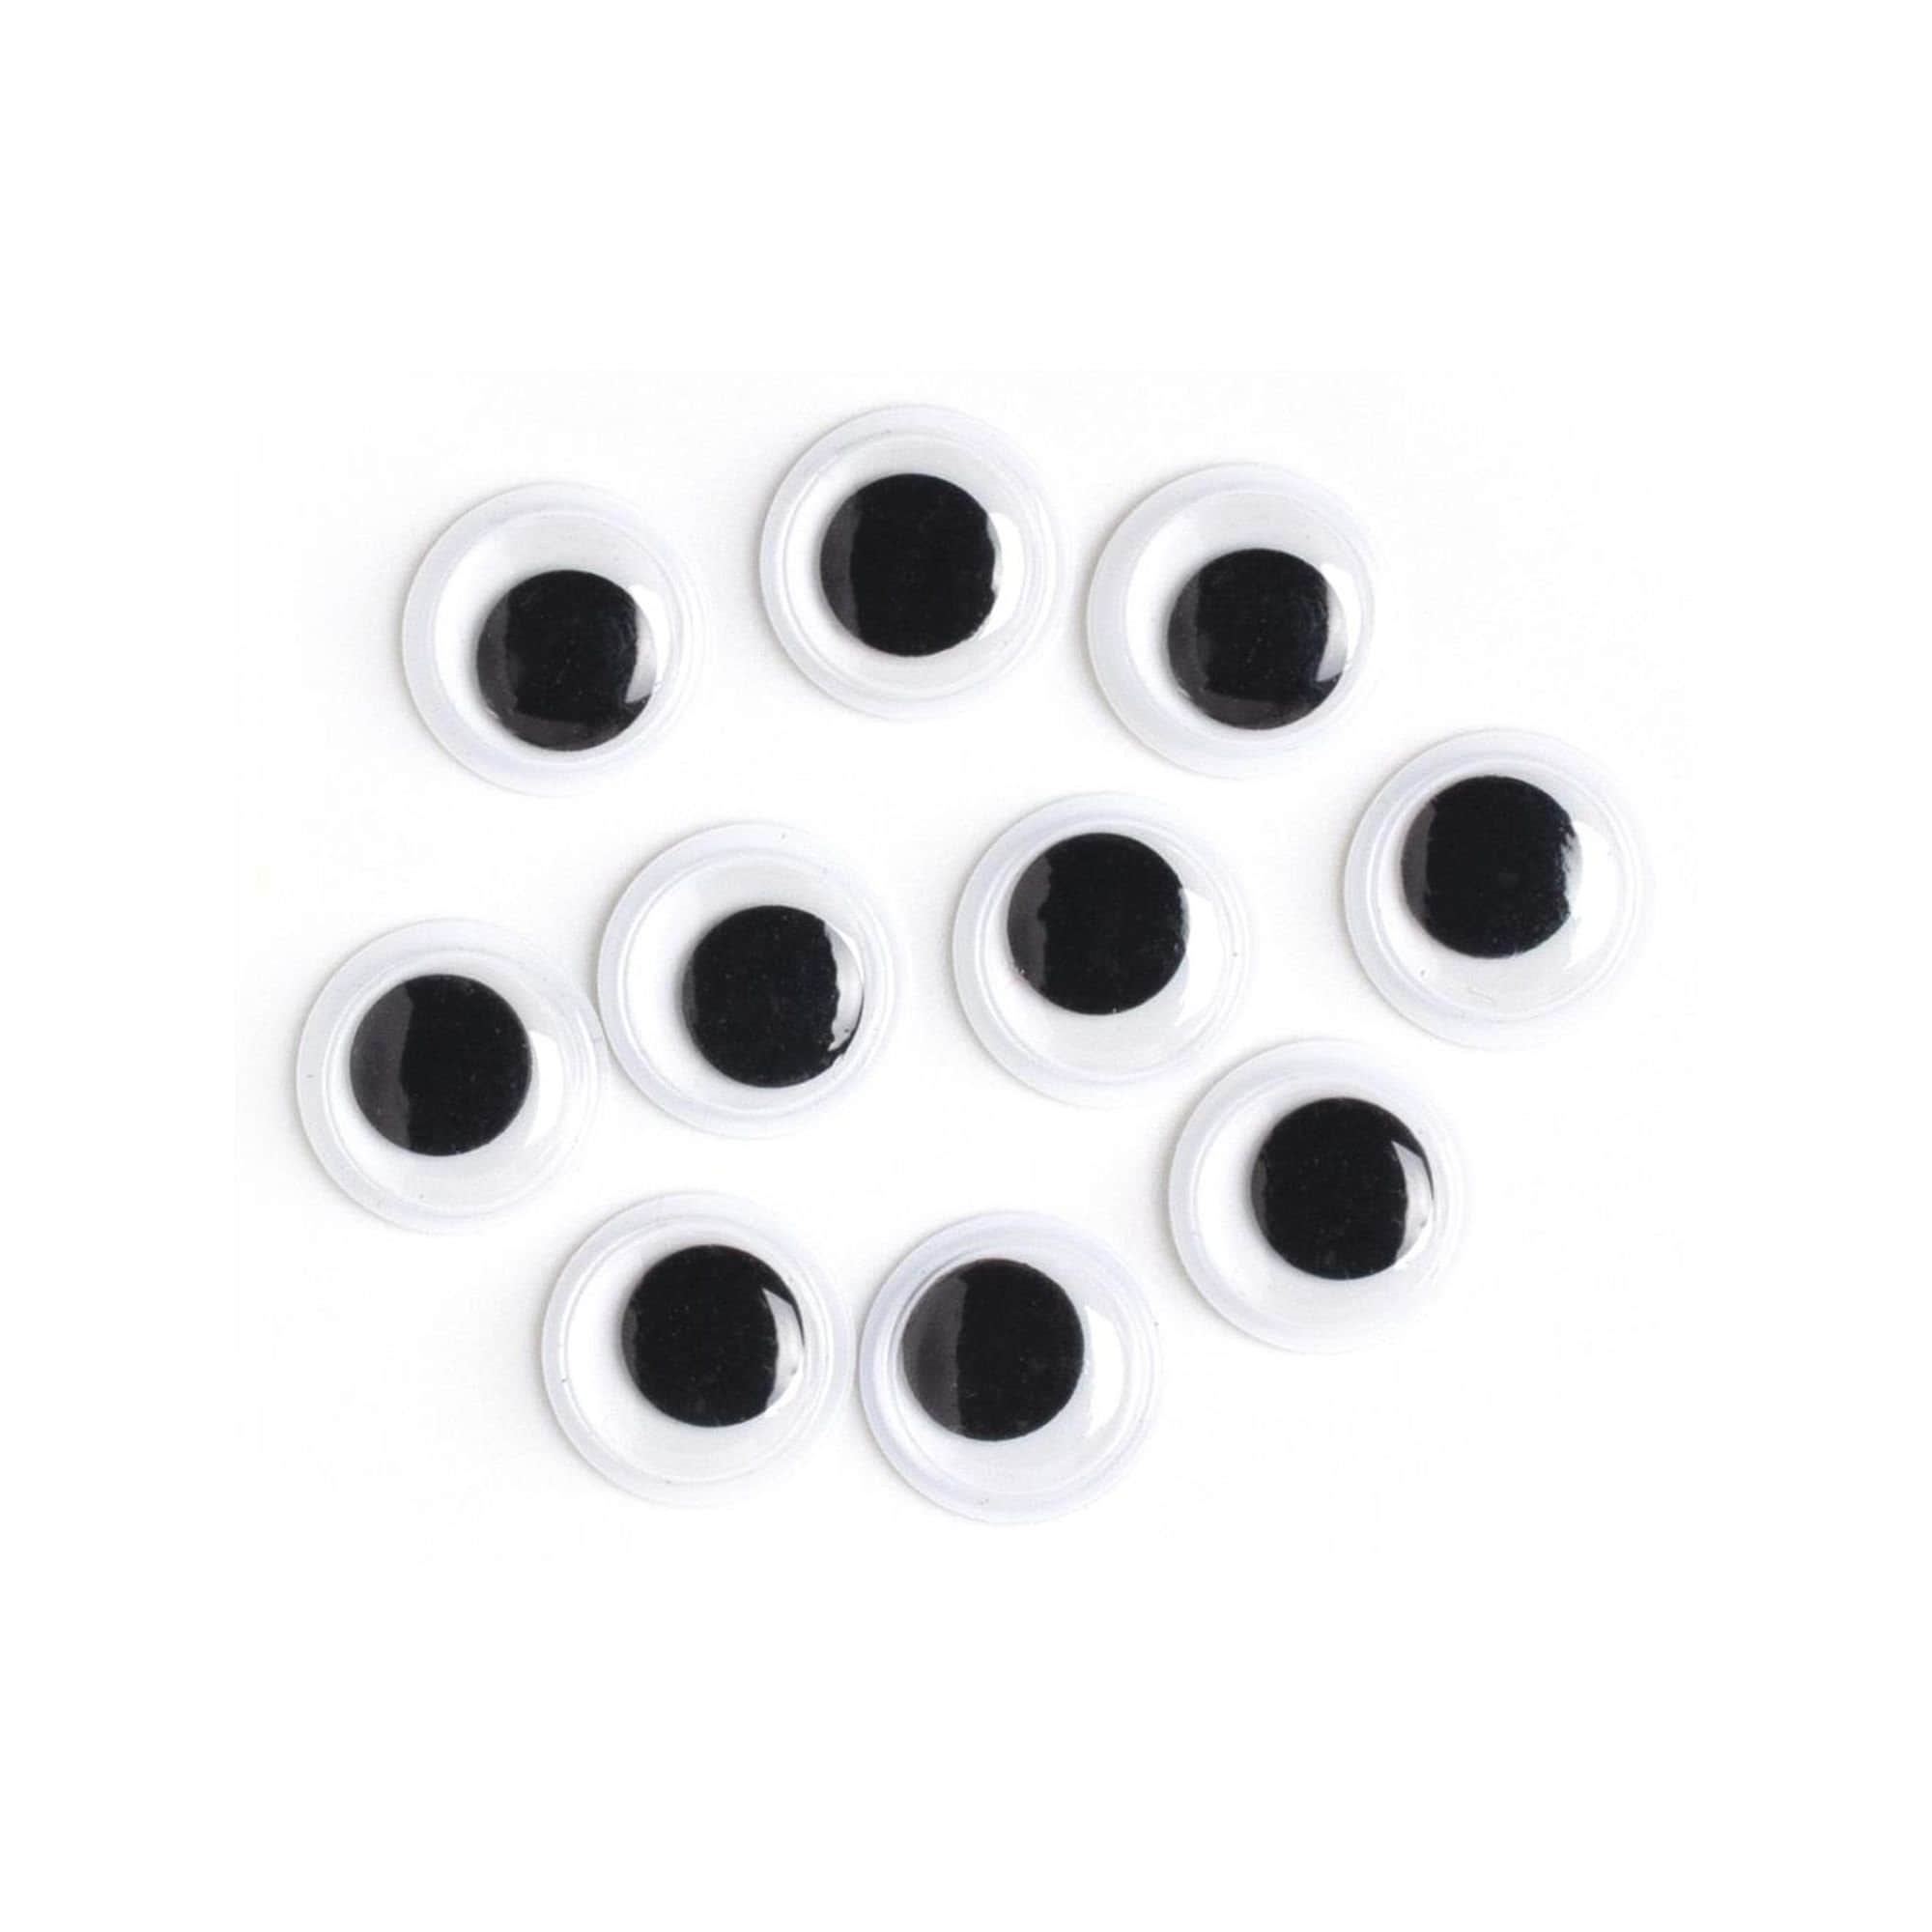 1500 Pieces Wiggle Eyes Self Adhesive for Crafts,Googly Eyes Plastic Safety Doll Eyes for DIY Scrapbooking Crafts 